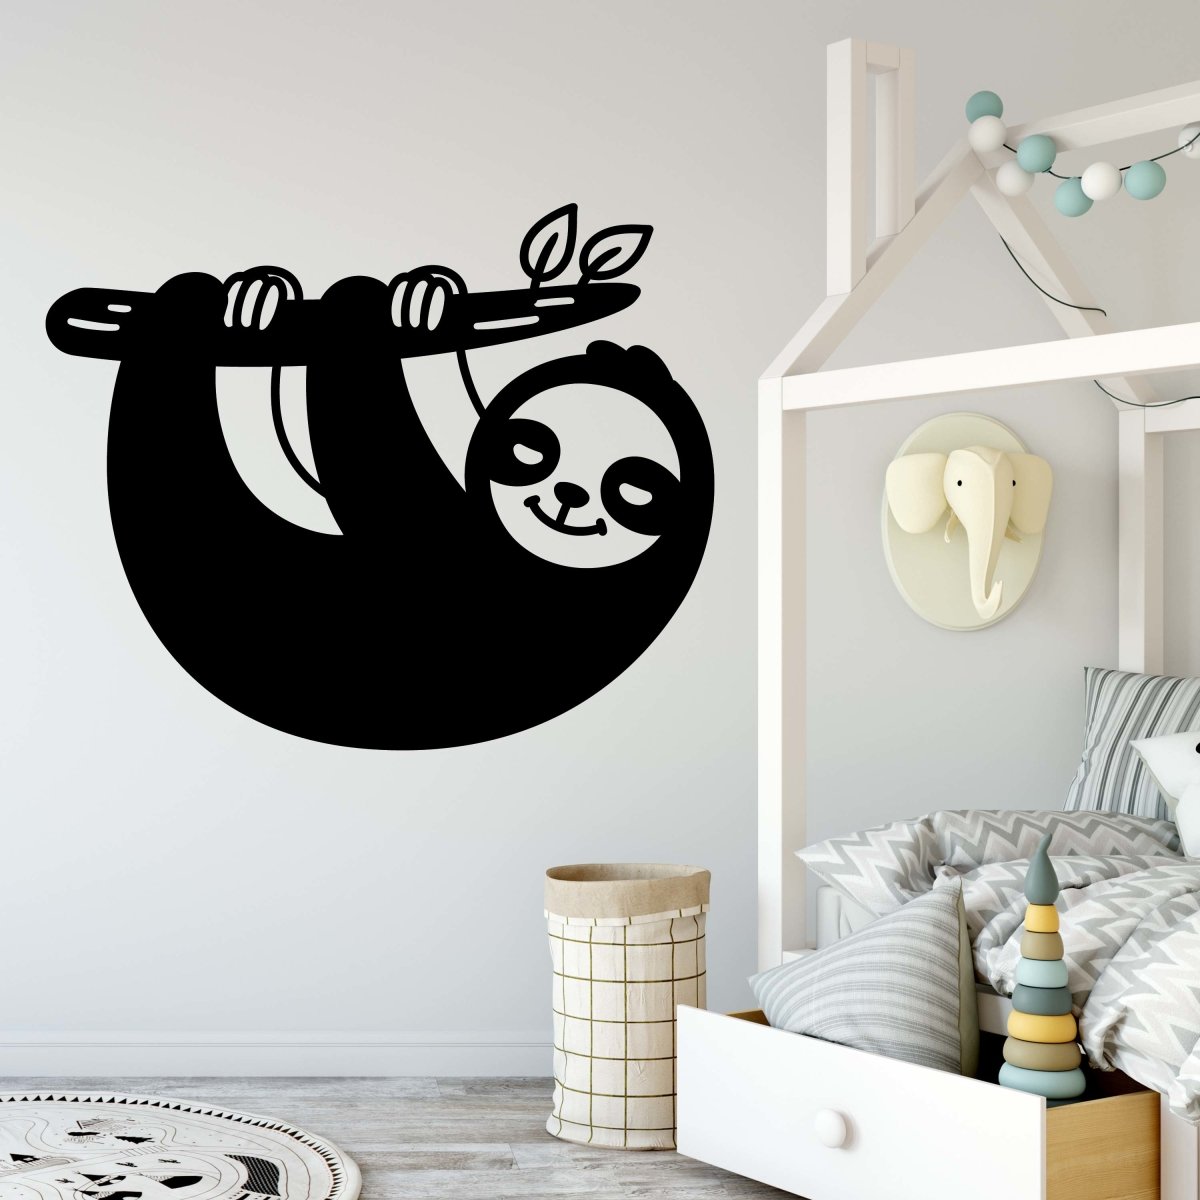 Discover on decal the sloth branch wall WT00000070 a